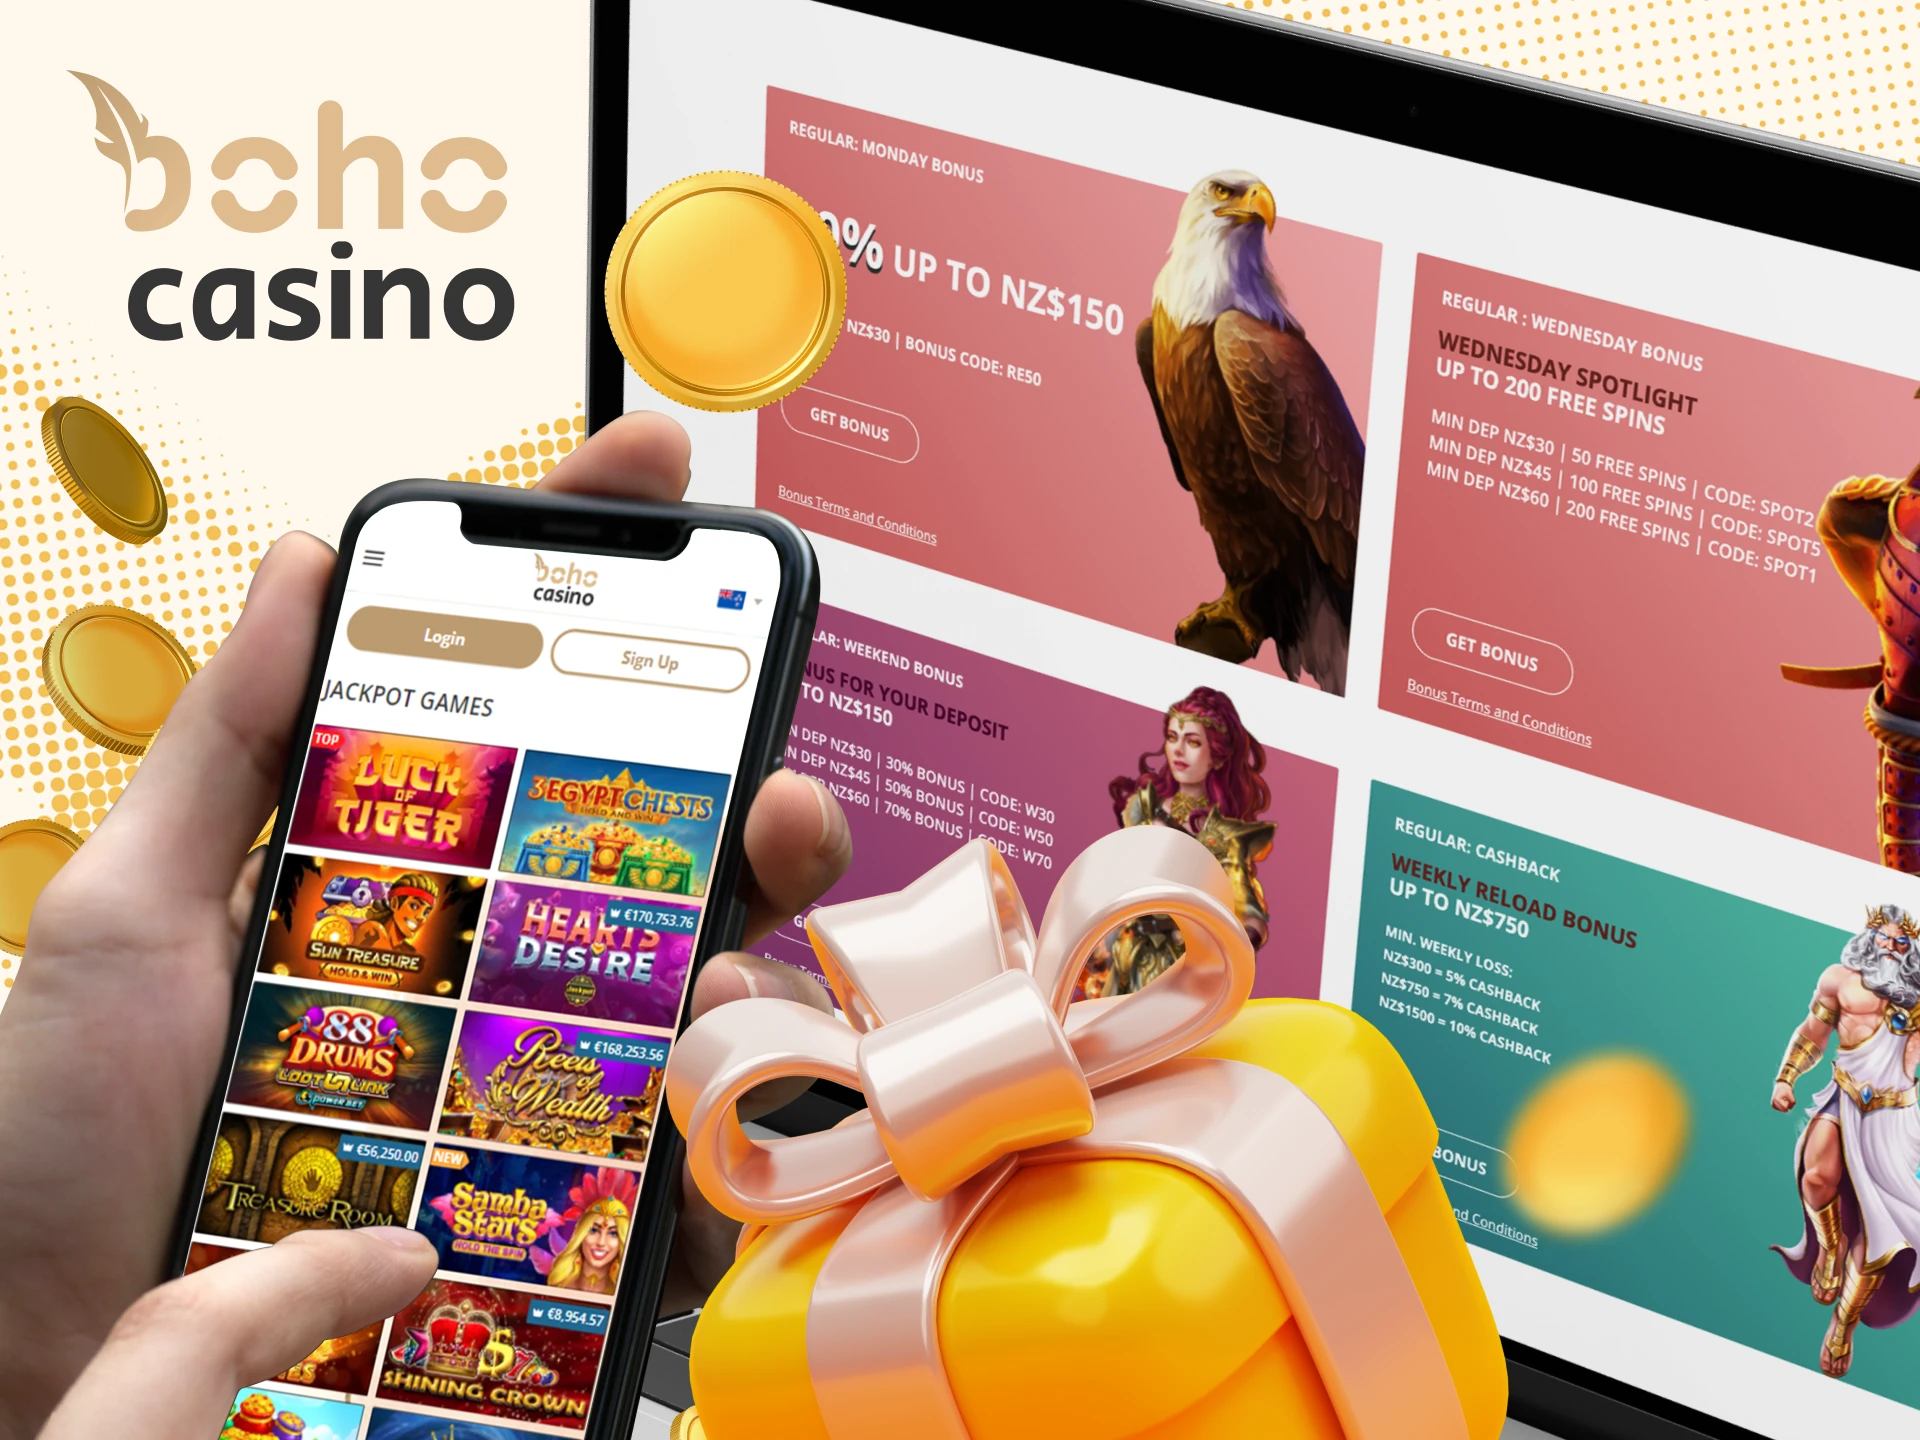 Boho Casino bonuses for jackpot games can increase your winnings.